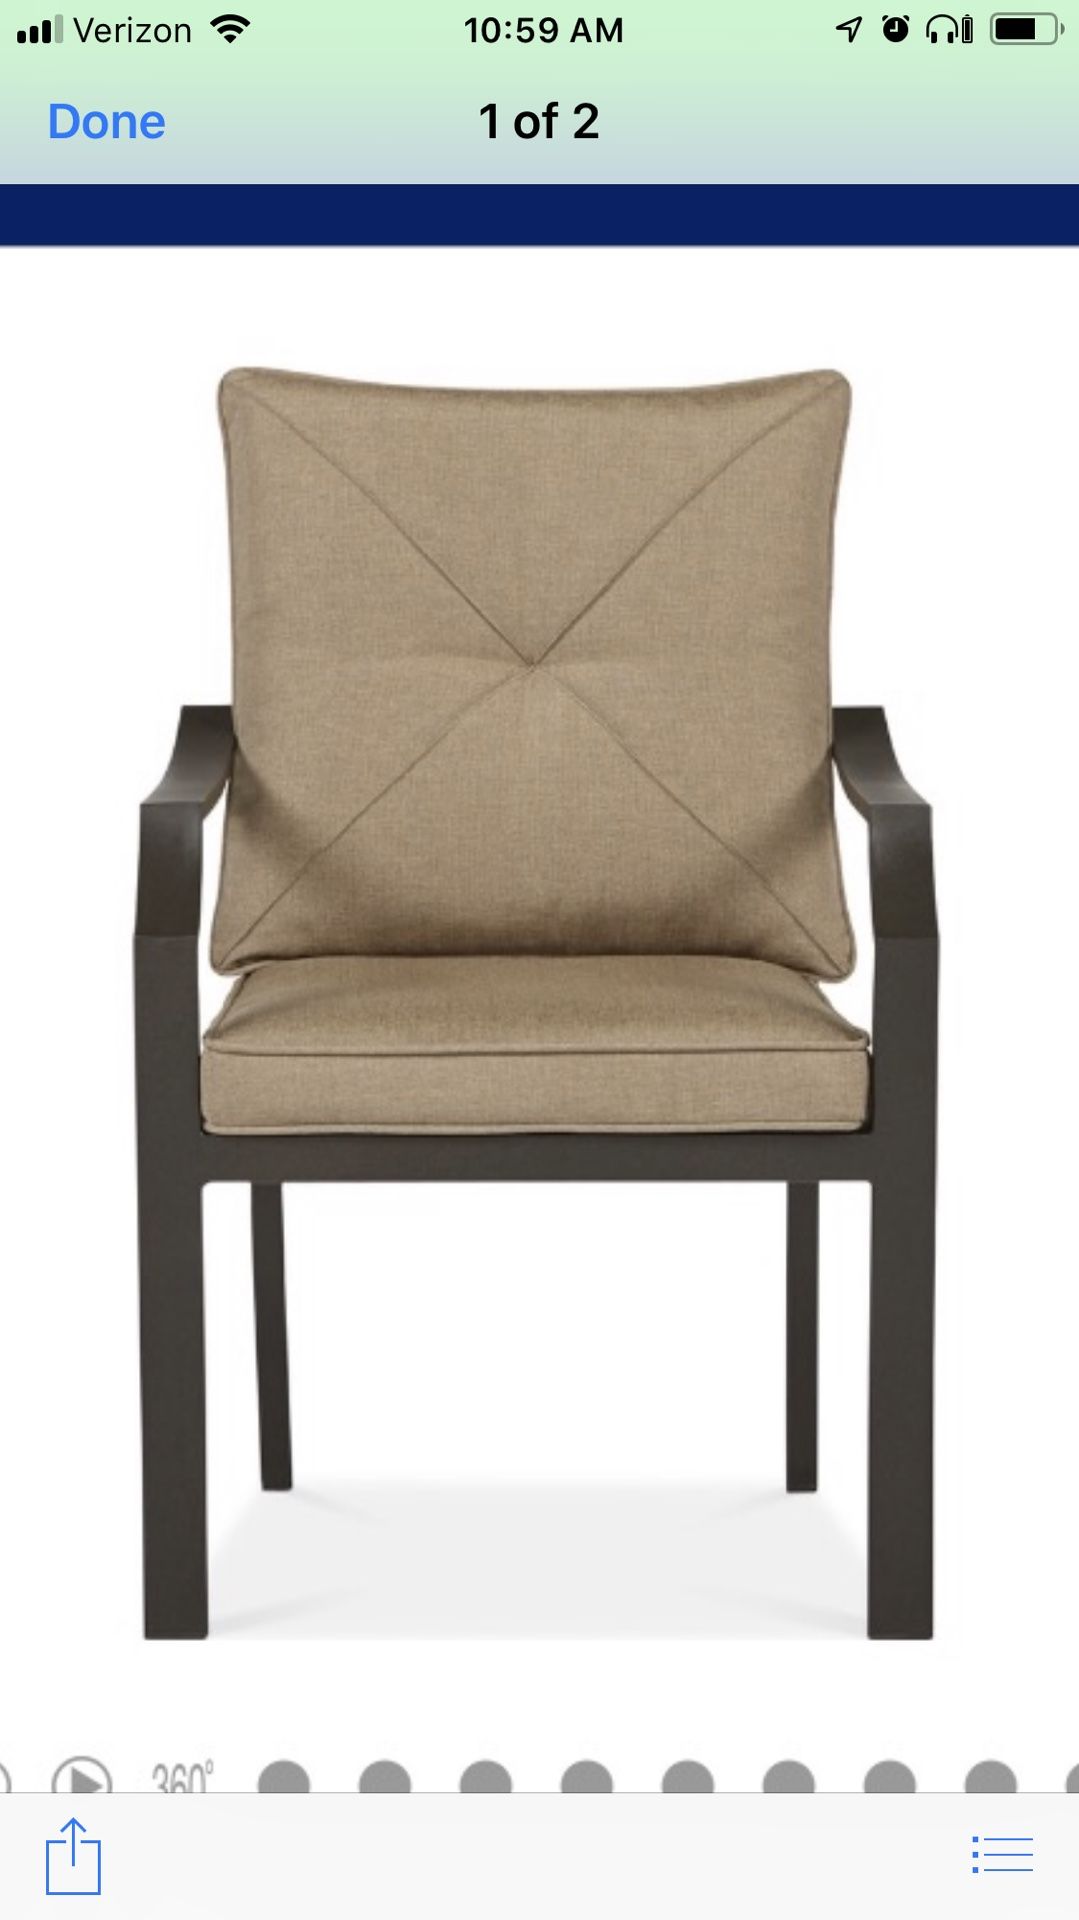 Chairs set of 4